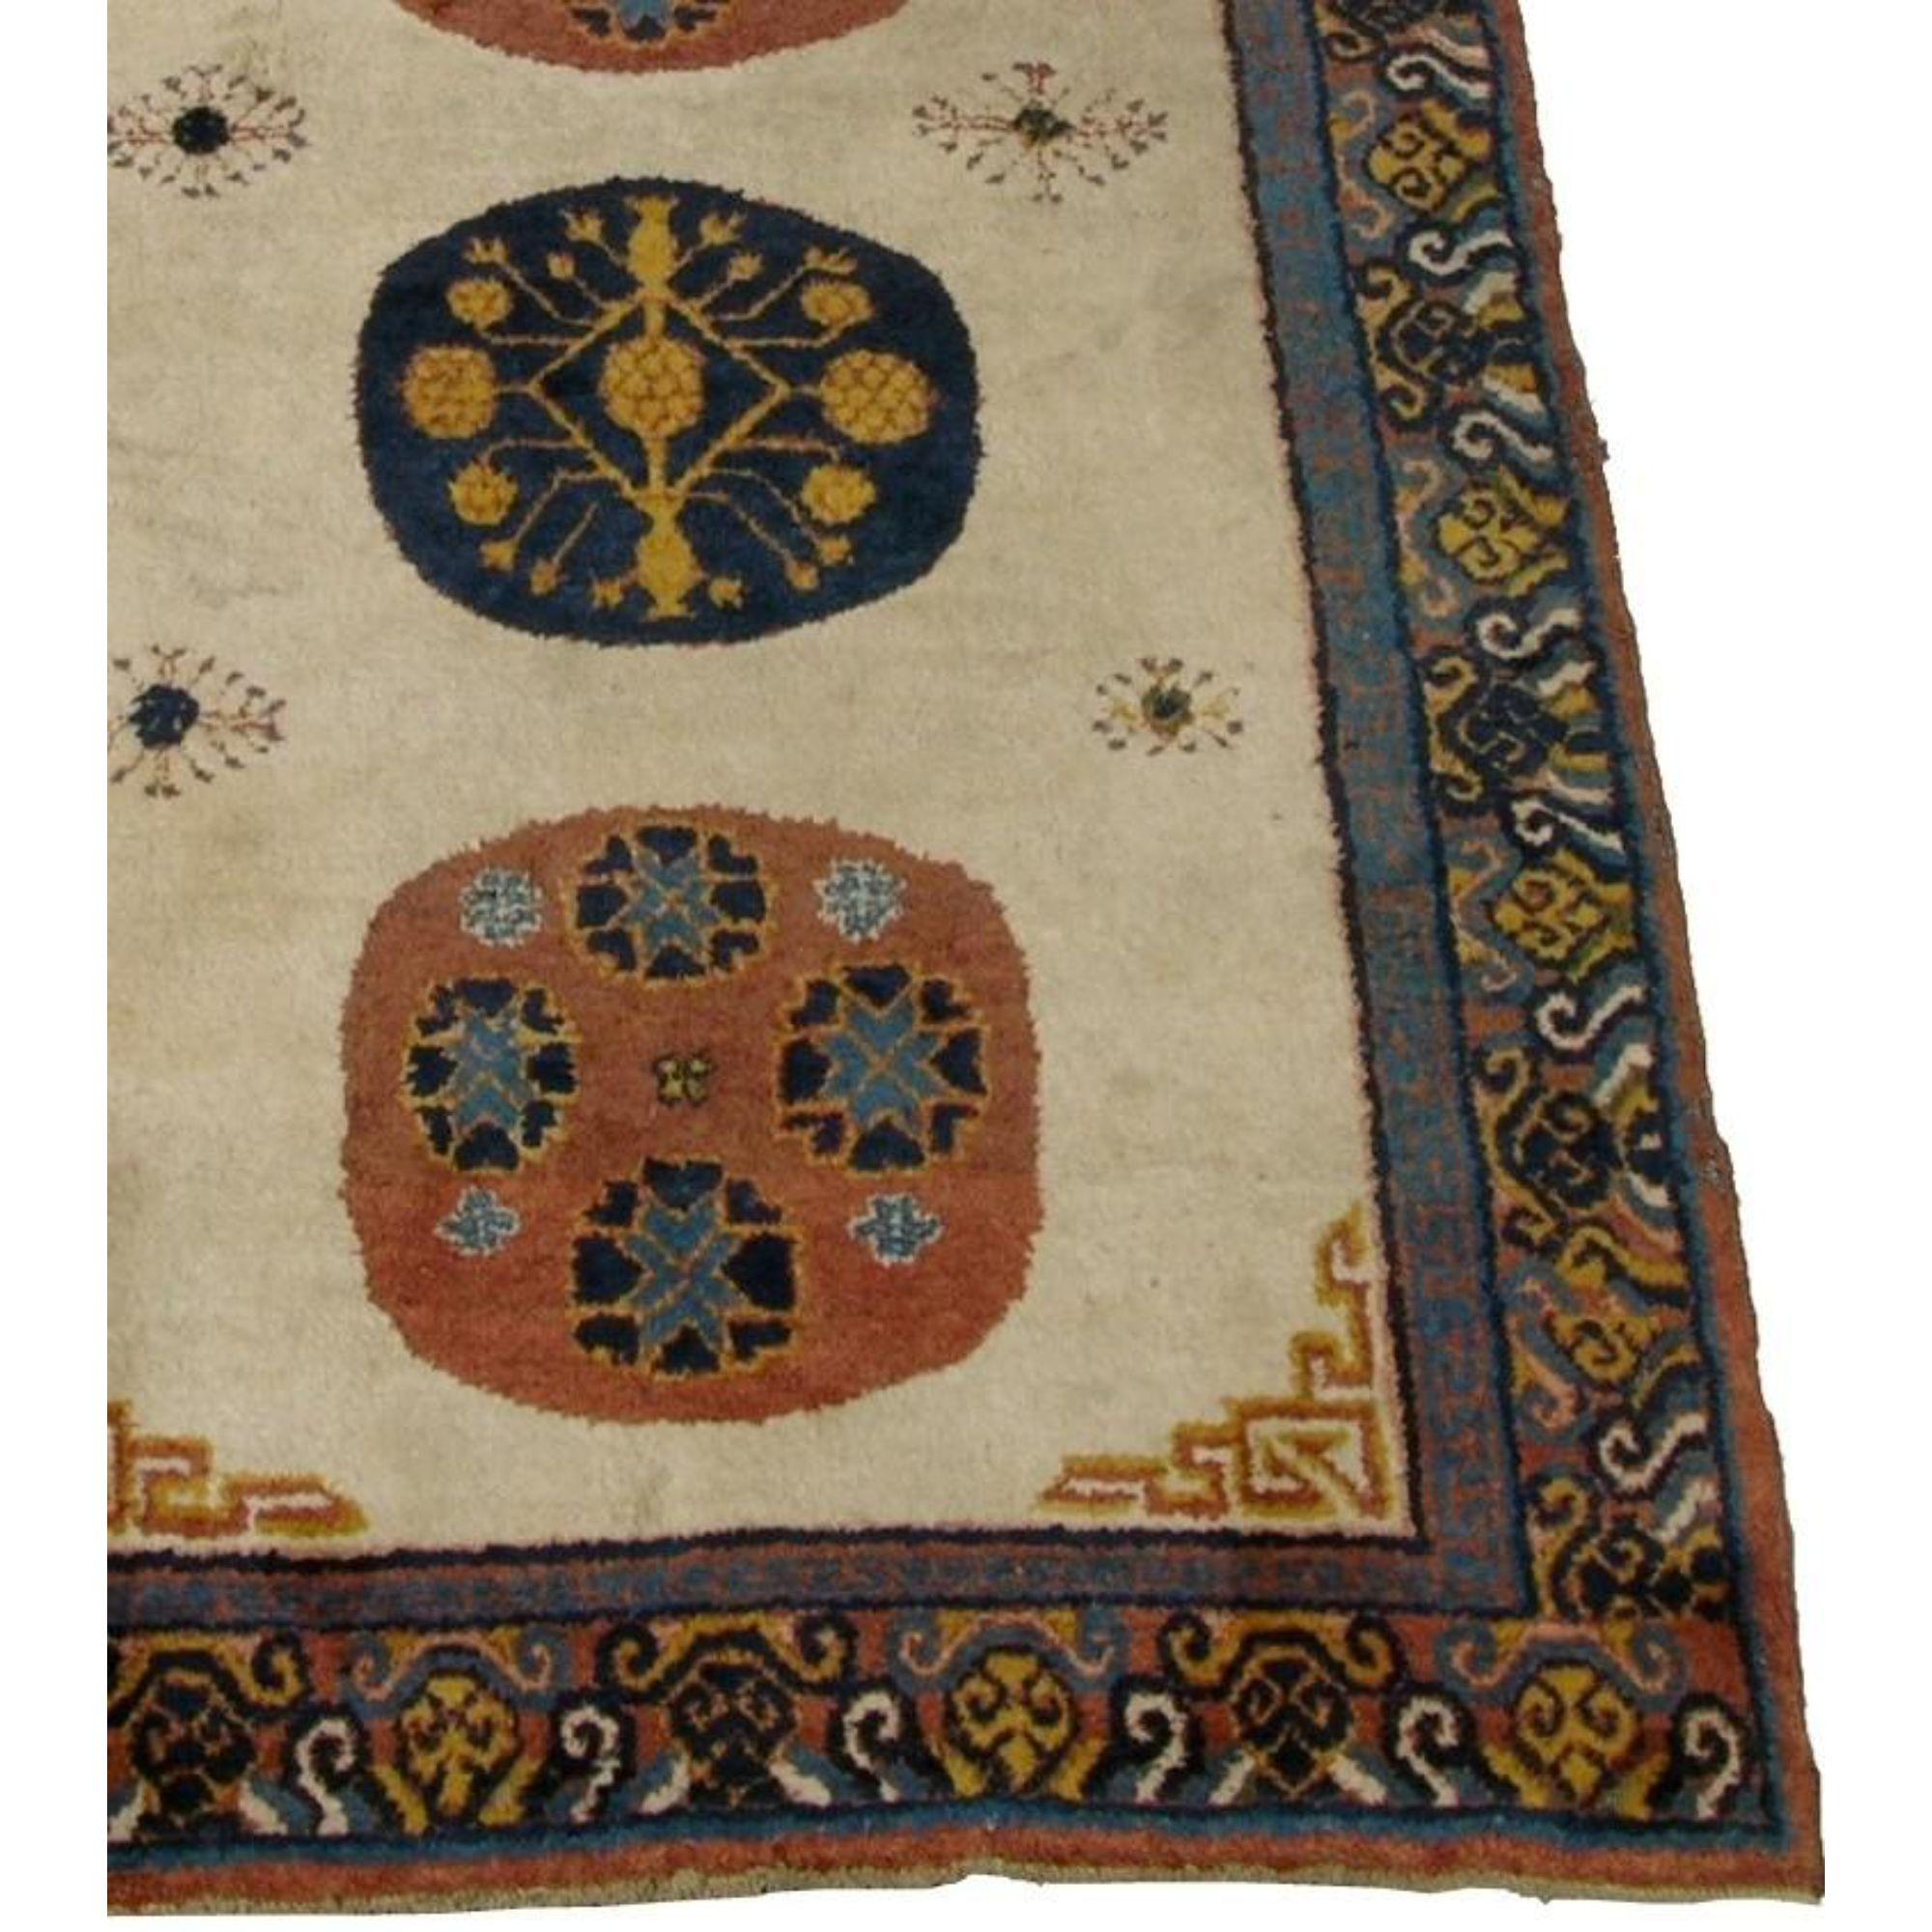 Up for sale is a 1900s Antique, Authentic Uzbek Samarkand Rug. It has a raditional and tribal style.